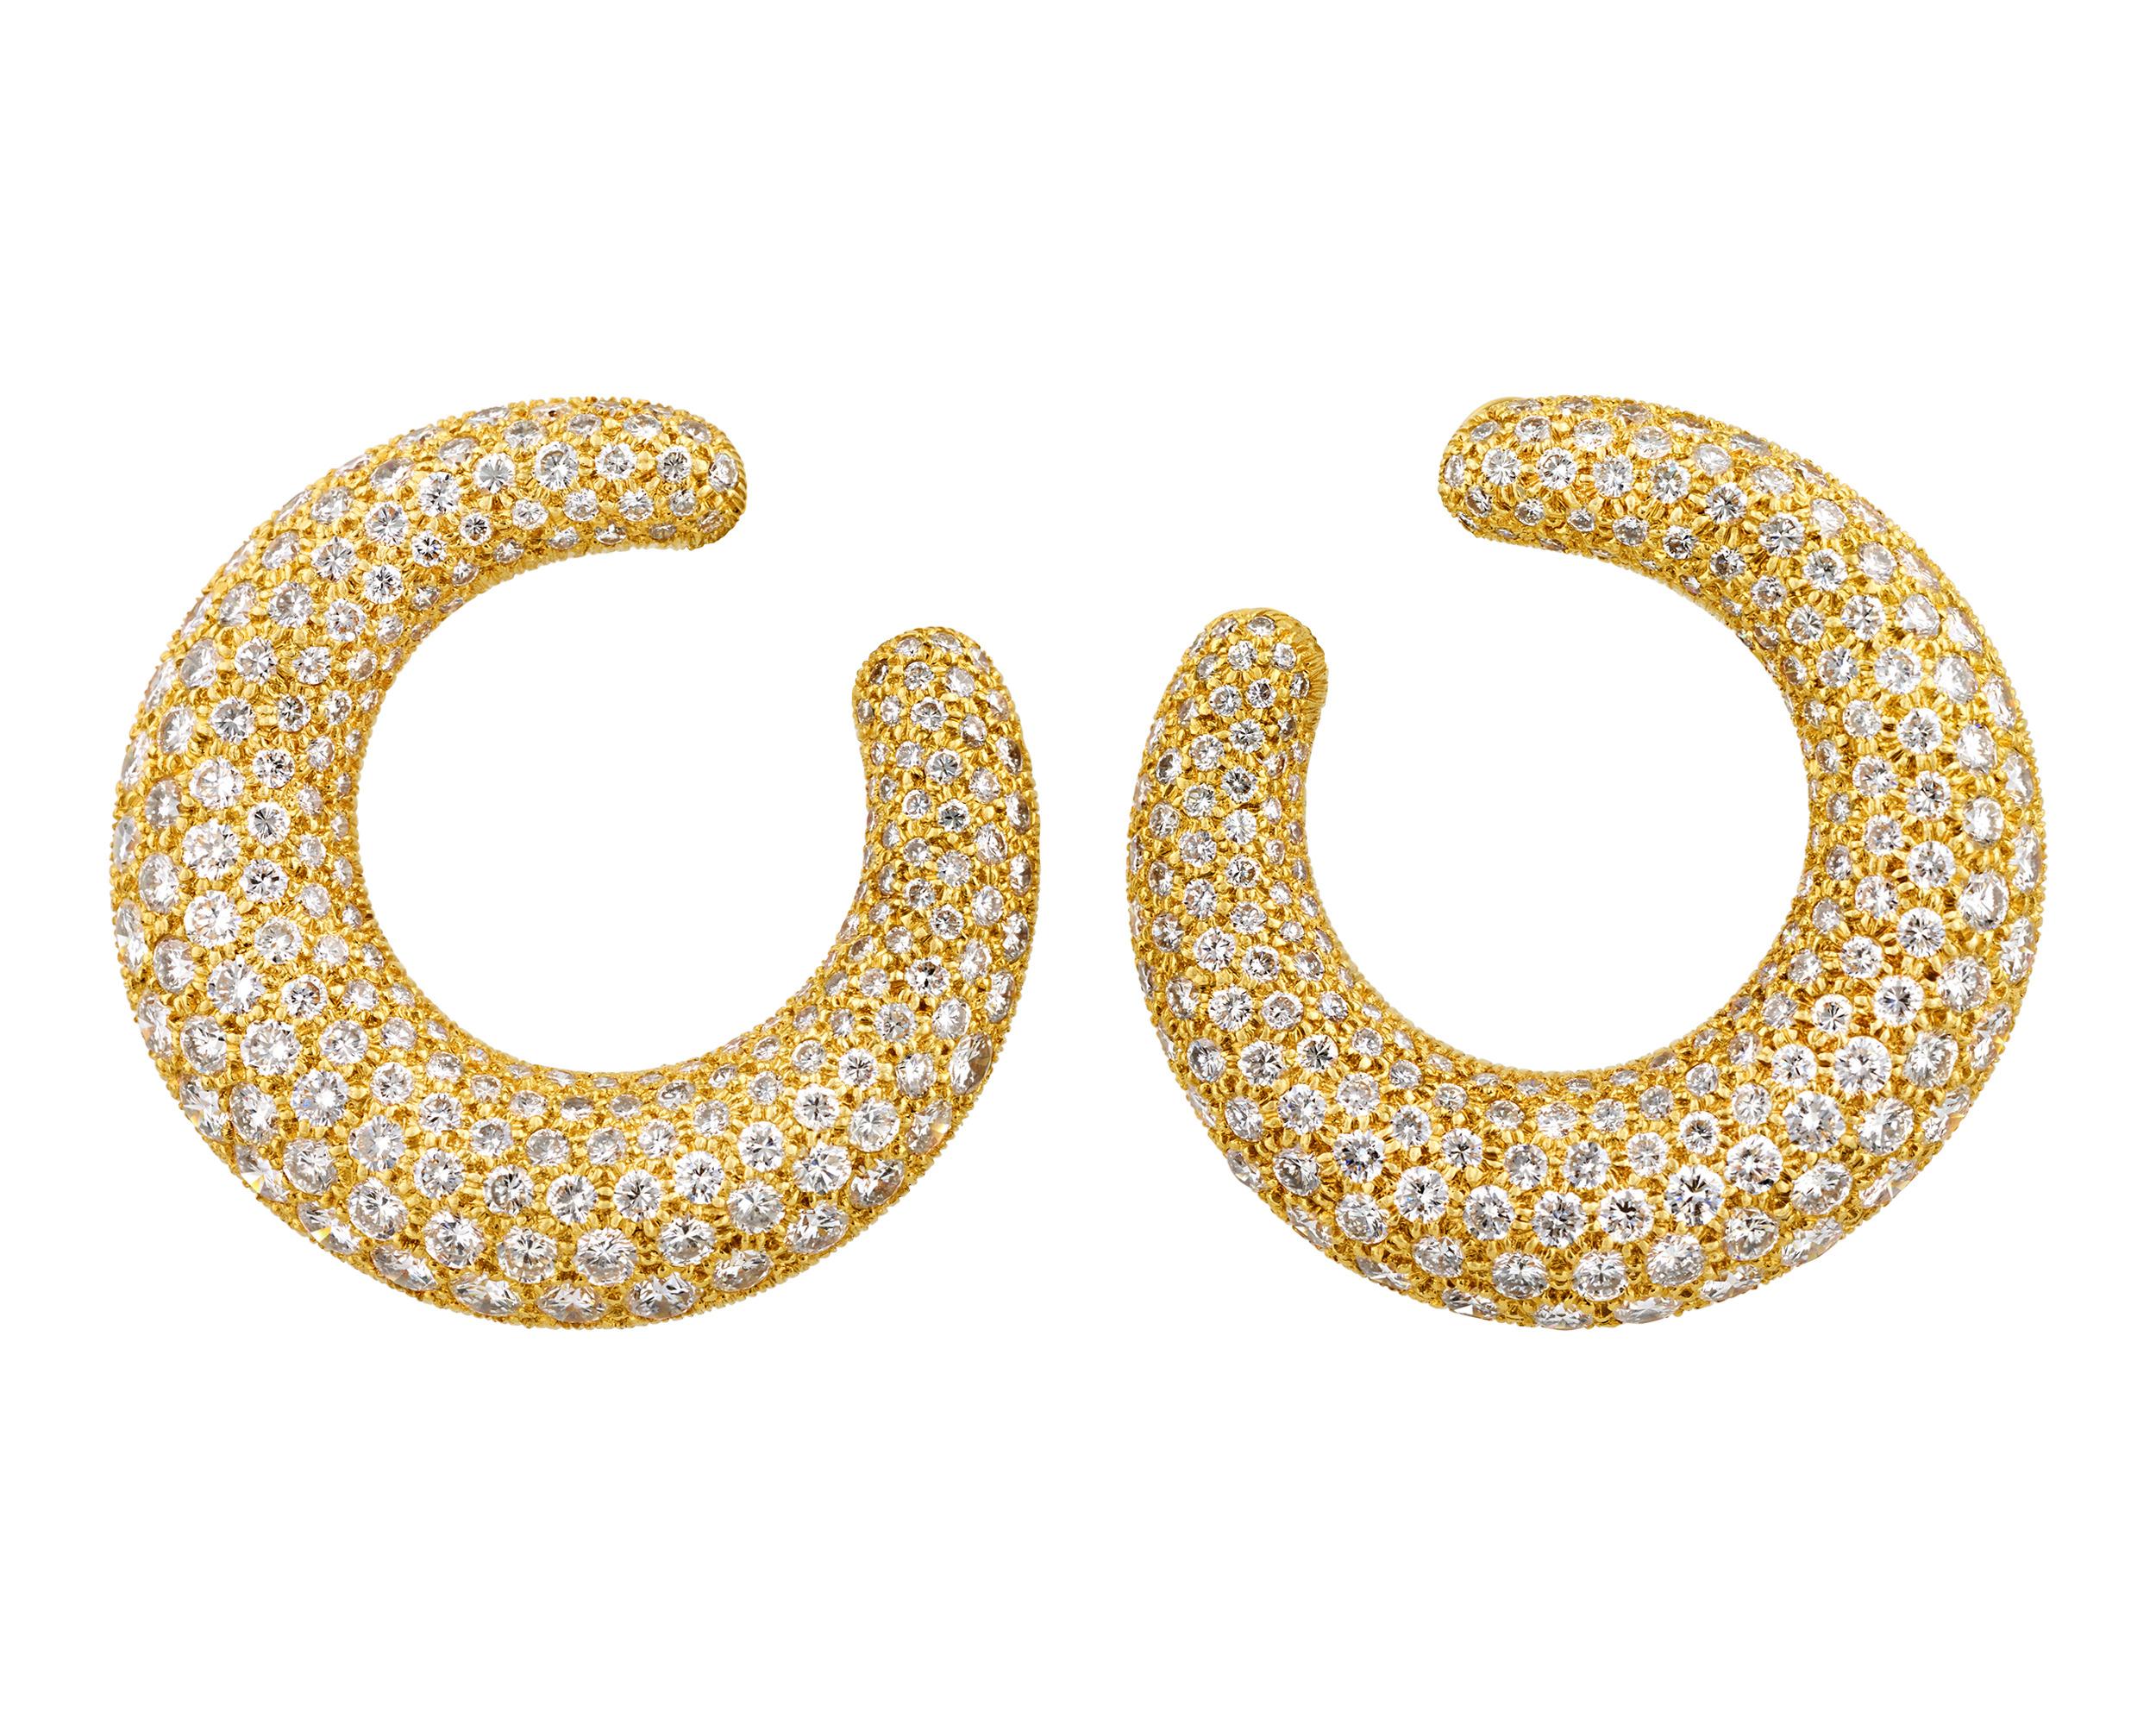 These bold and sophisticated earrings by Cartier feature a unique elongated hoop design. The glamorous earrings include approximately 12.00 carats of dazzling white diamonds, artfully arranged in 18K yellow gold hoops.

Cartier, the renowned French